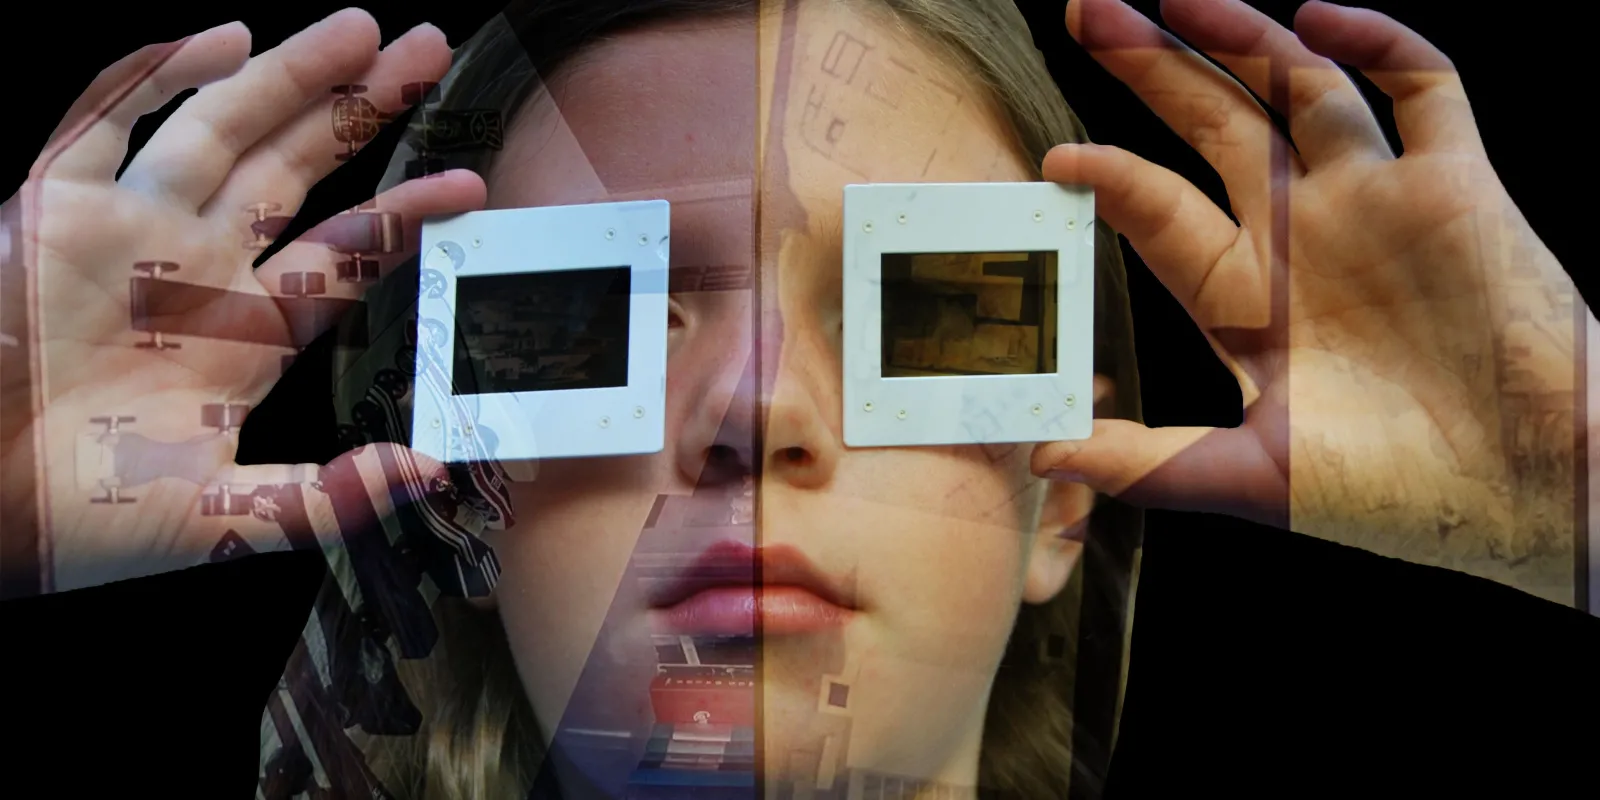 An image of a child holding cut-out squares over their eyes like 3D glasses